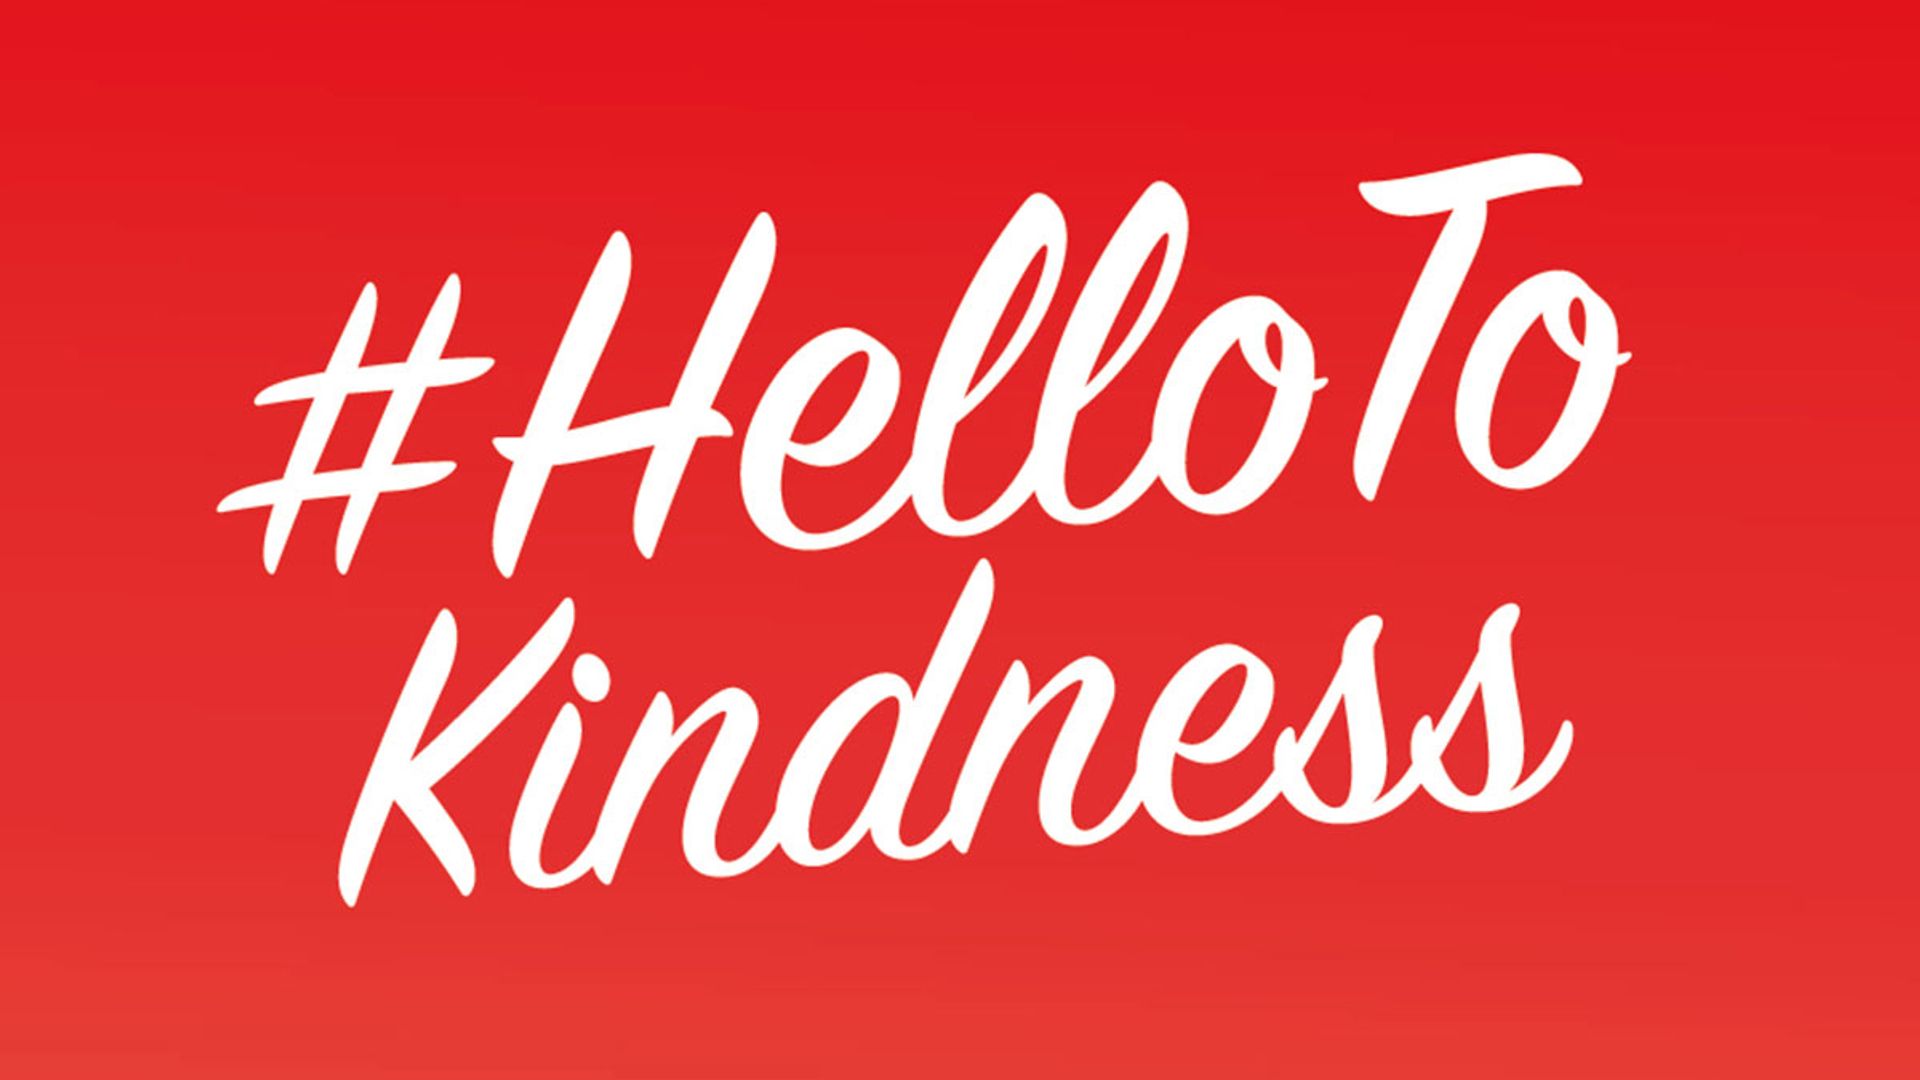 How you can join our #HelloToKindness movement